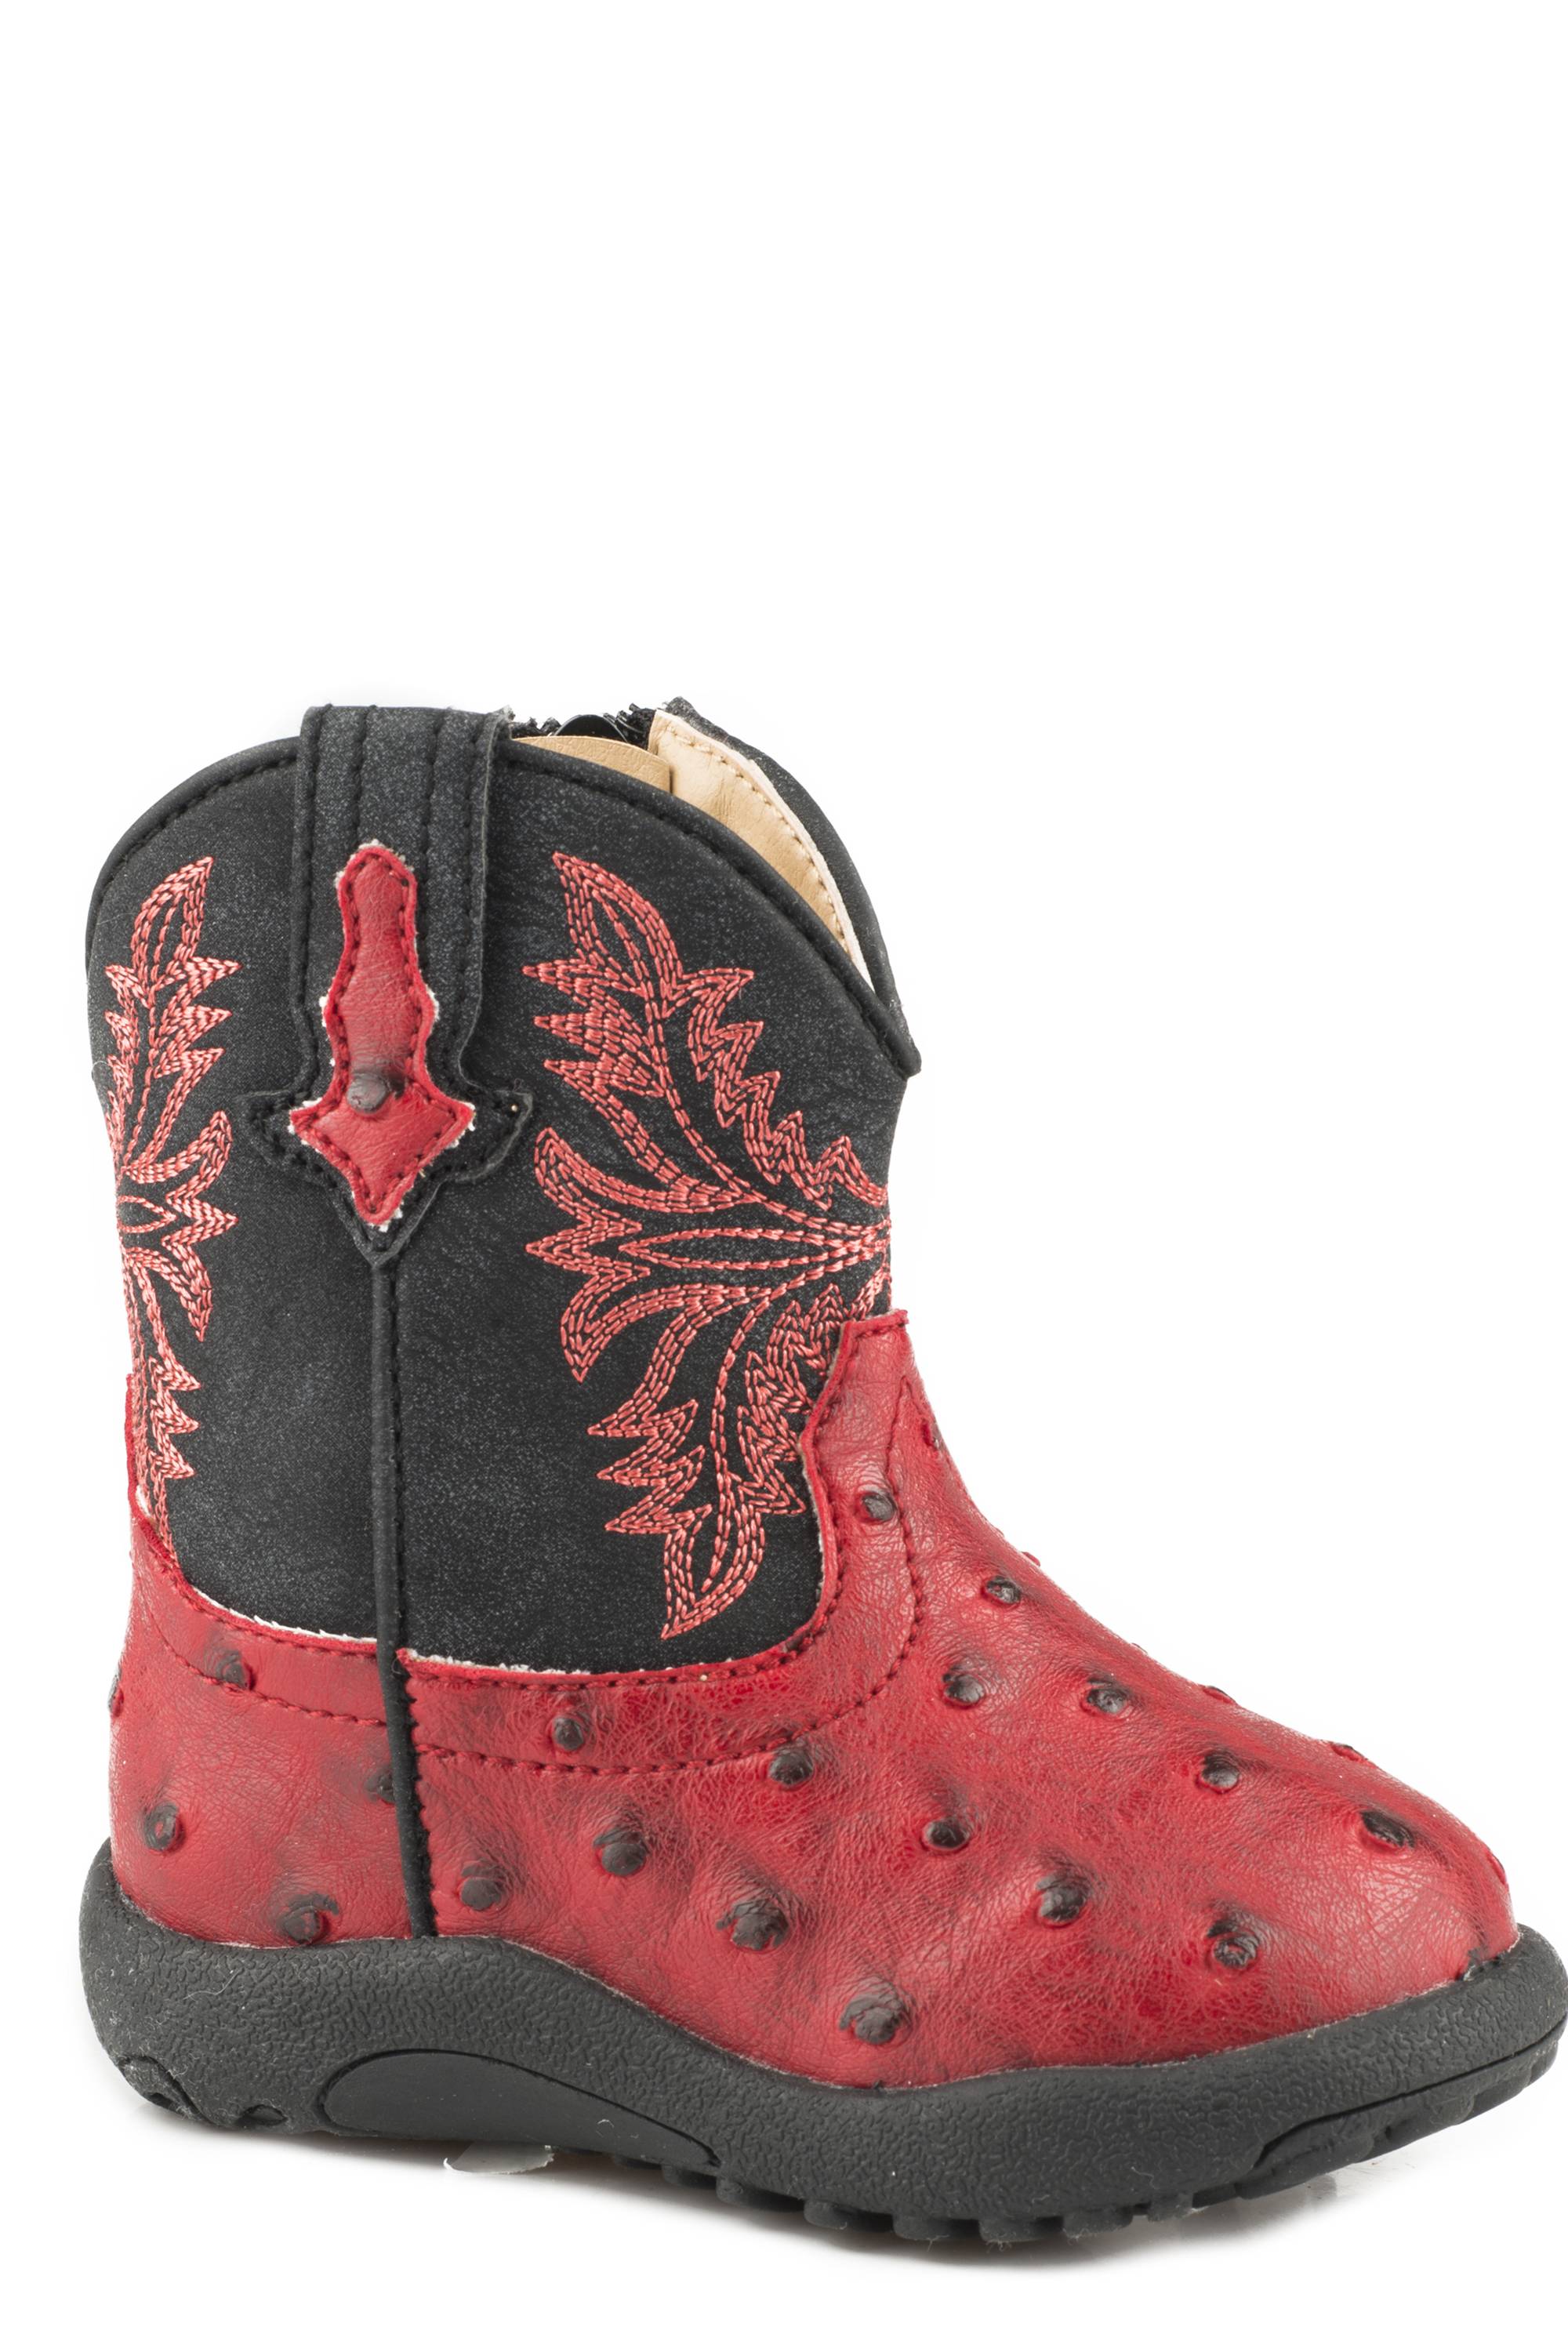 infant red boots